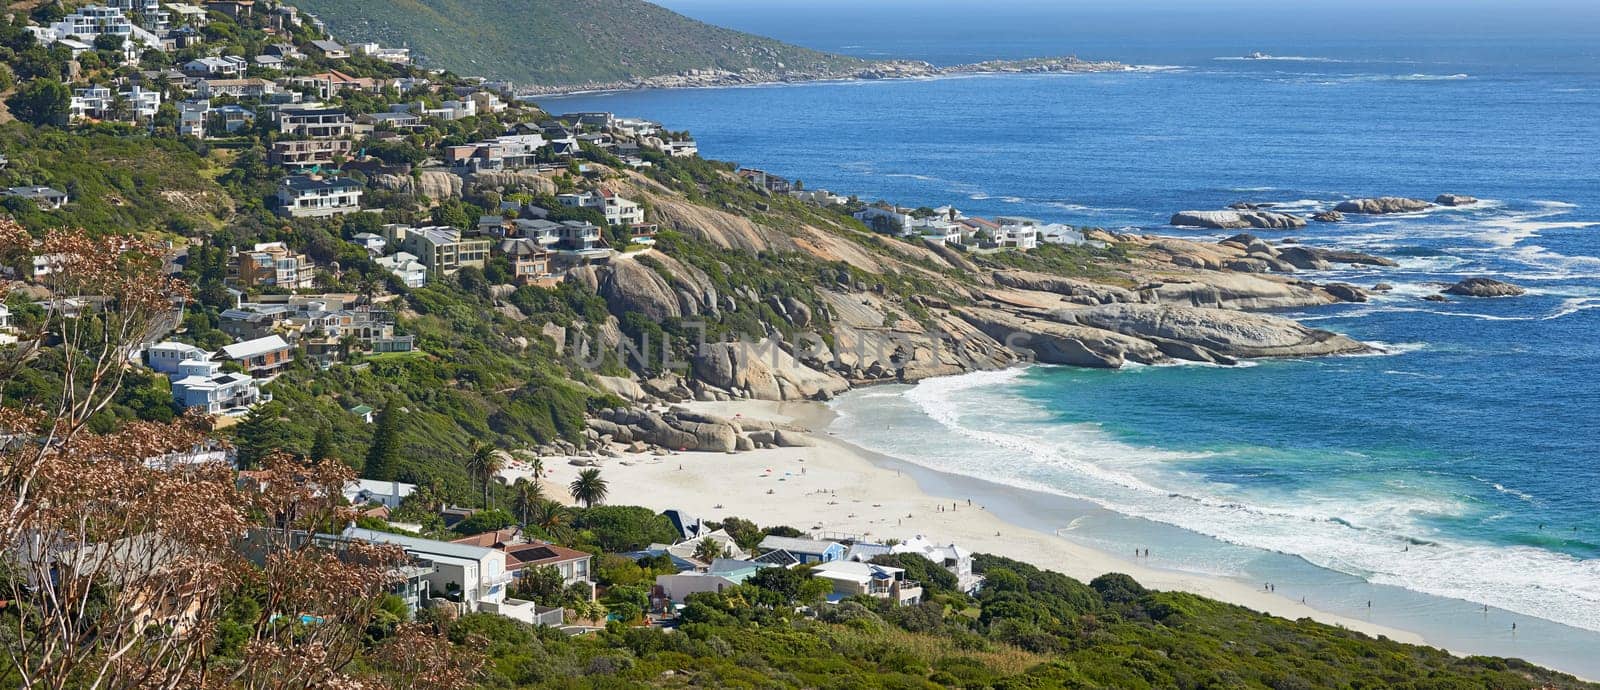 Mountain, beach and aerial of city by ocean in South Africa for tourism, traveling and global destination. Landscape, background and view of sea by urban town for adventure, vacation and holiday.